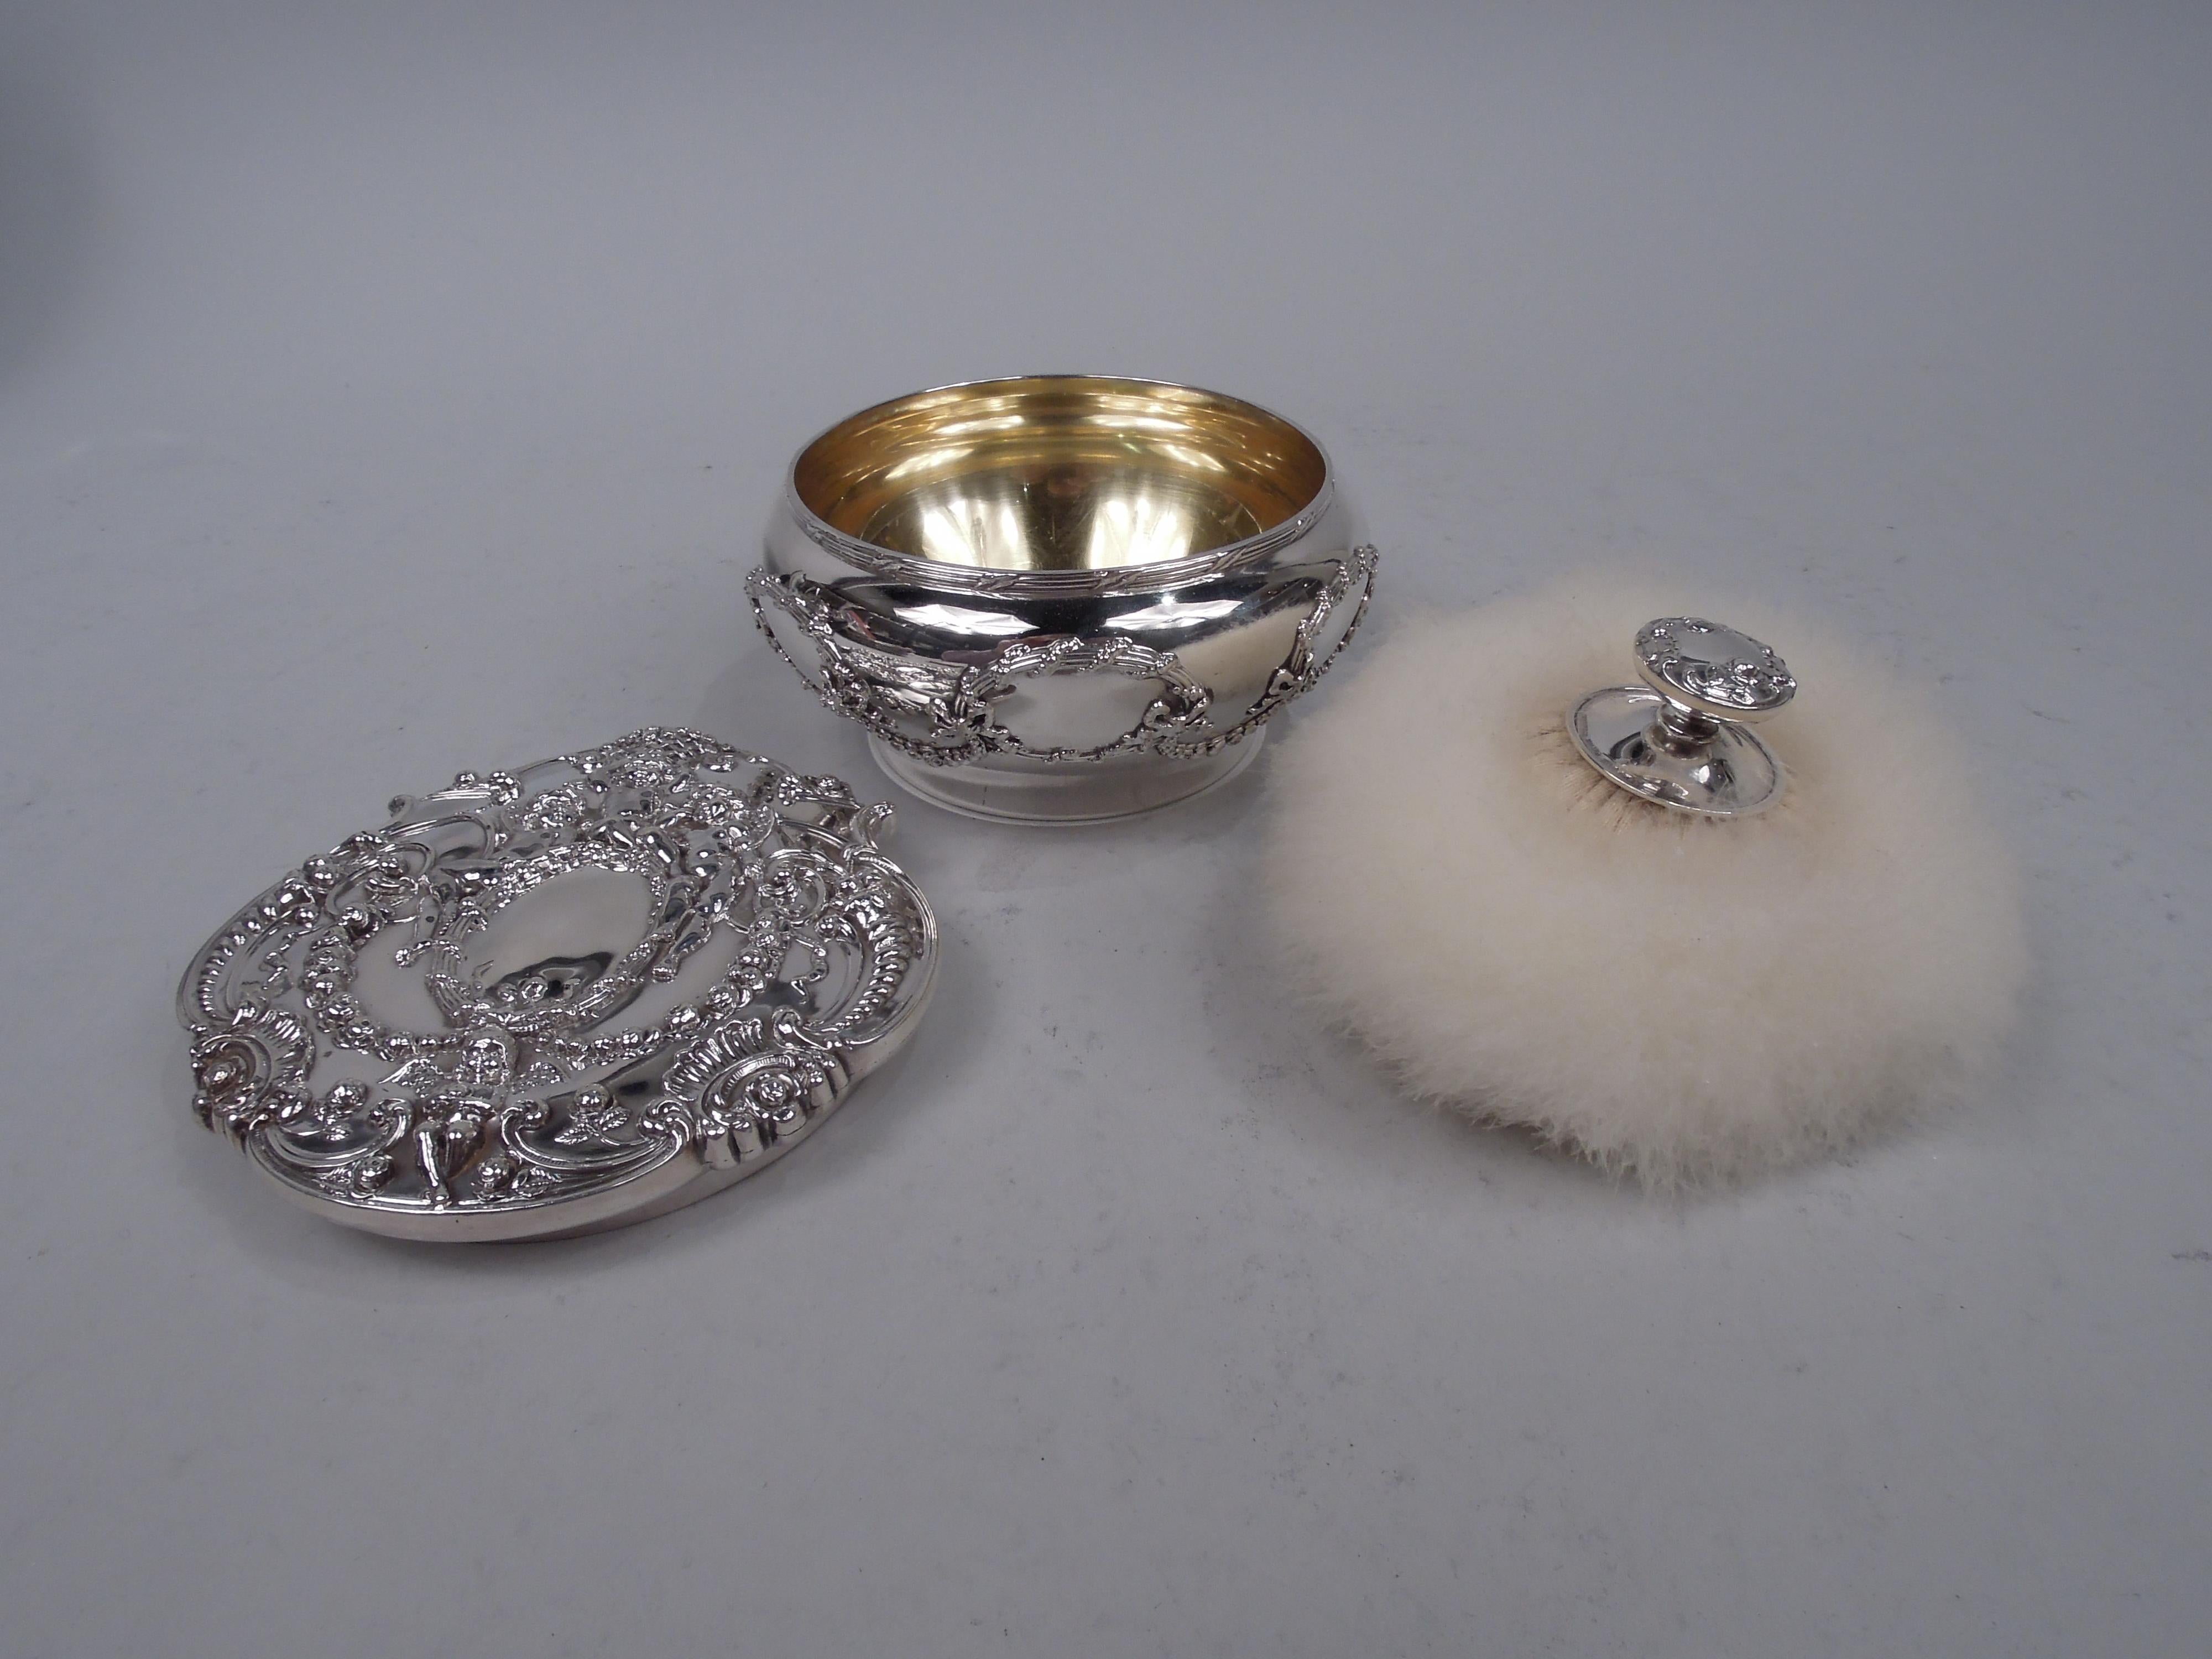 Edwardian Classical sterling silver powder box. Made by Tiffany & Co. in New York. Round and bellied with flat and scrolled cover. Chased and applied ornament. On bowl oval reeded frames joined by pendant garlands. On cover central same frame